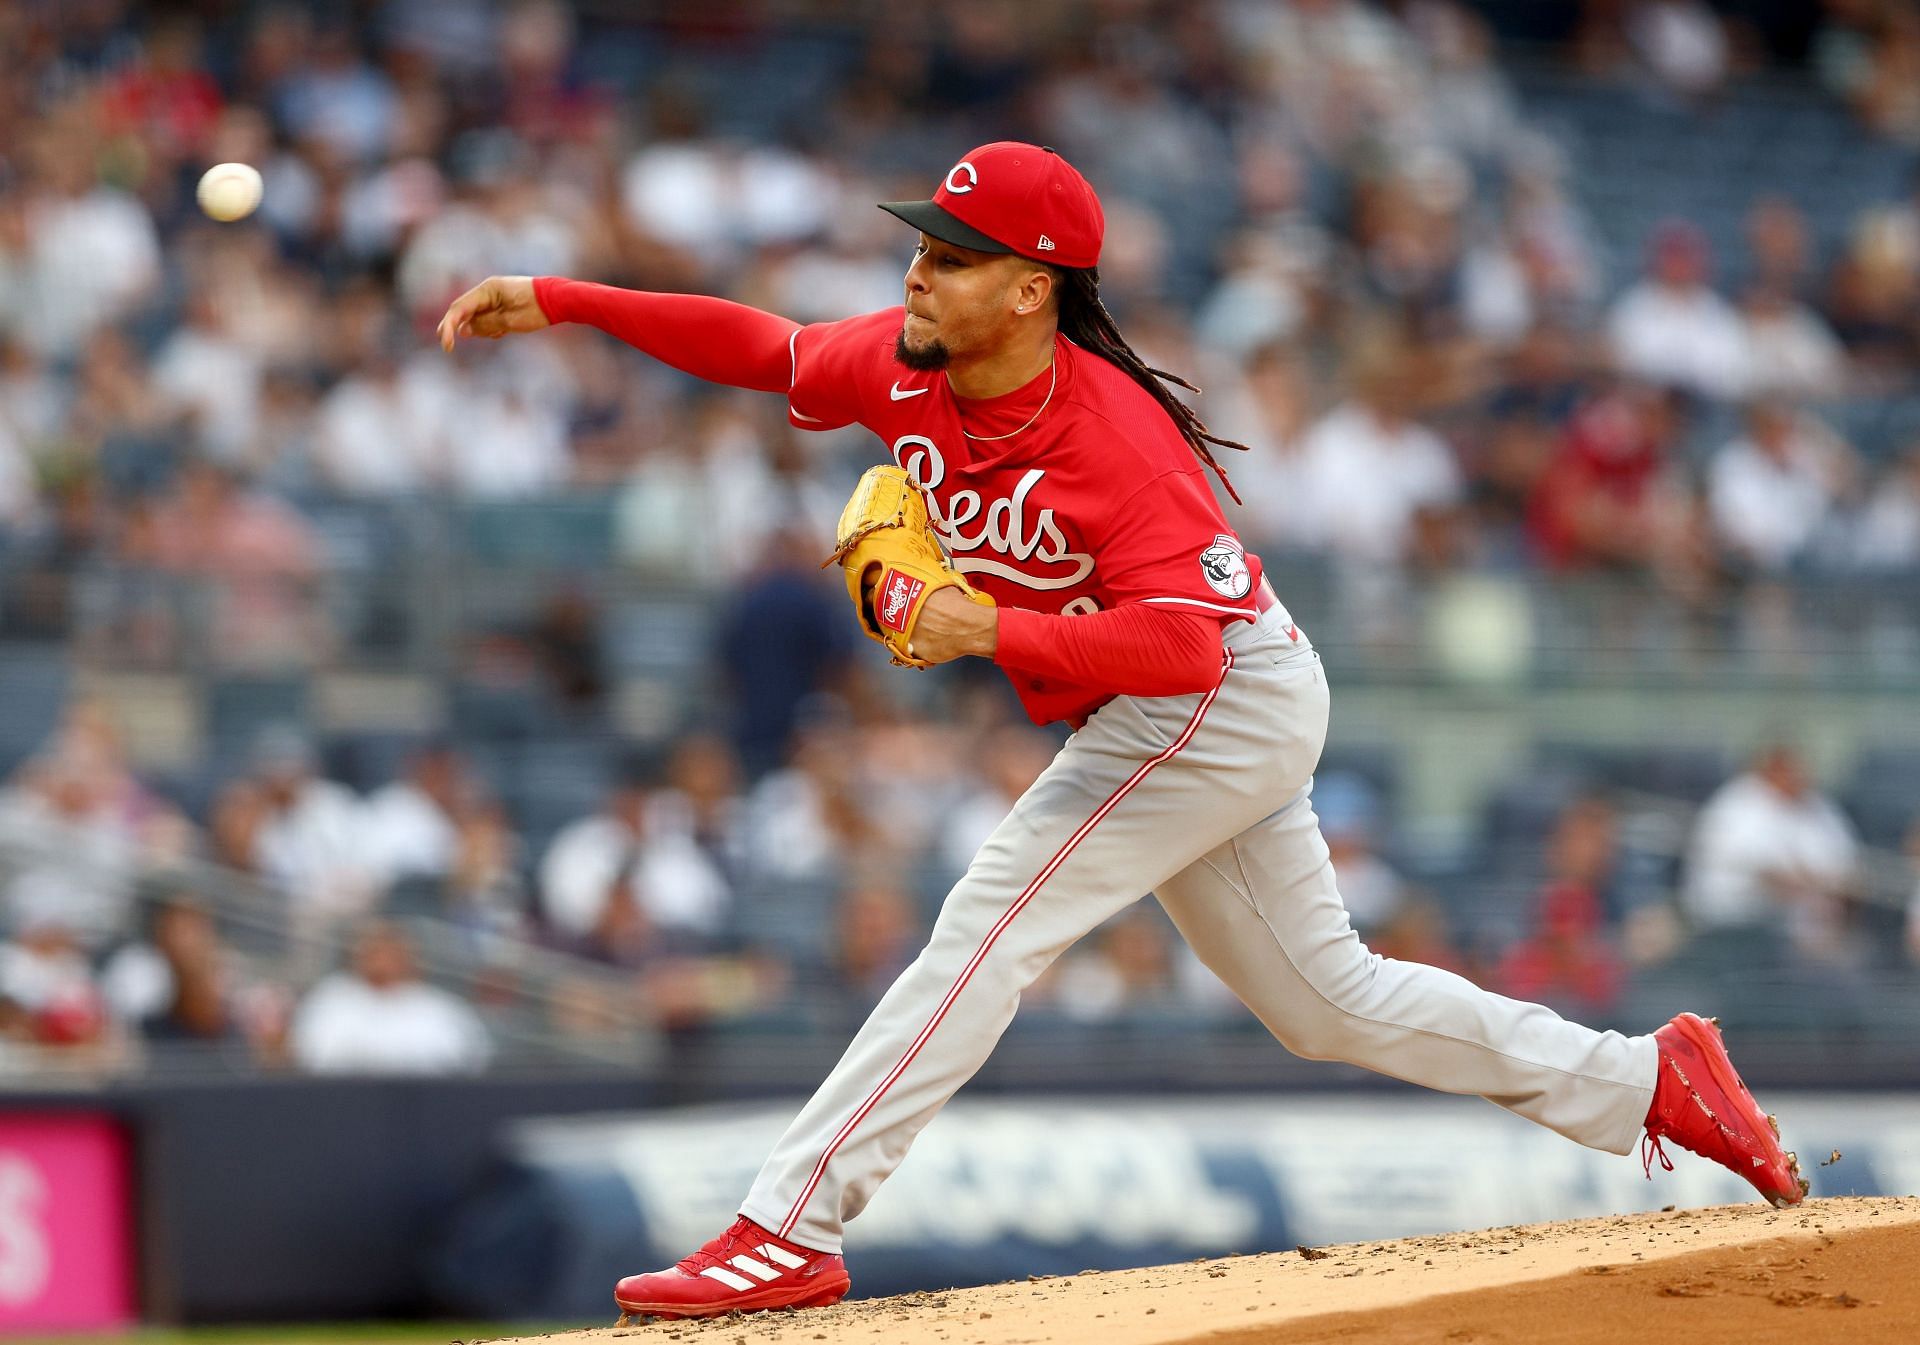 Luis Castillo pitches during the Cincinnati Reds game against the New York Yankees.